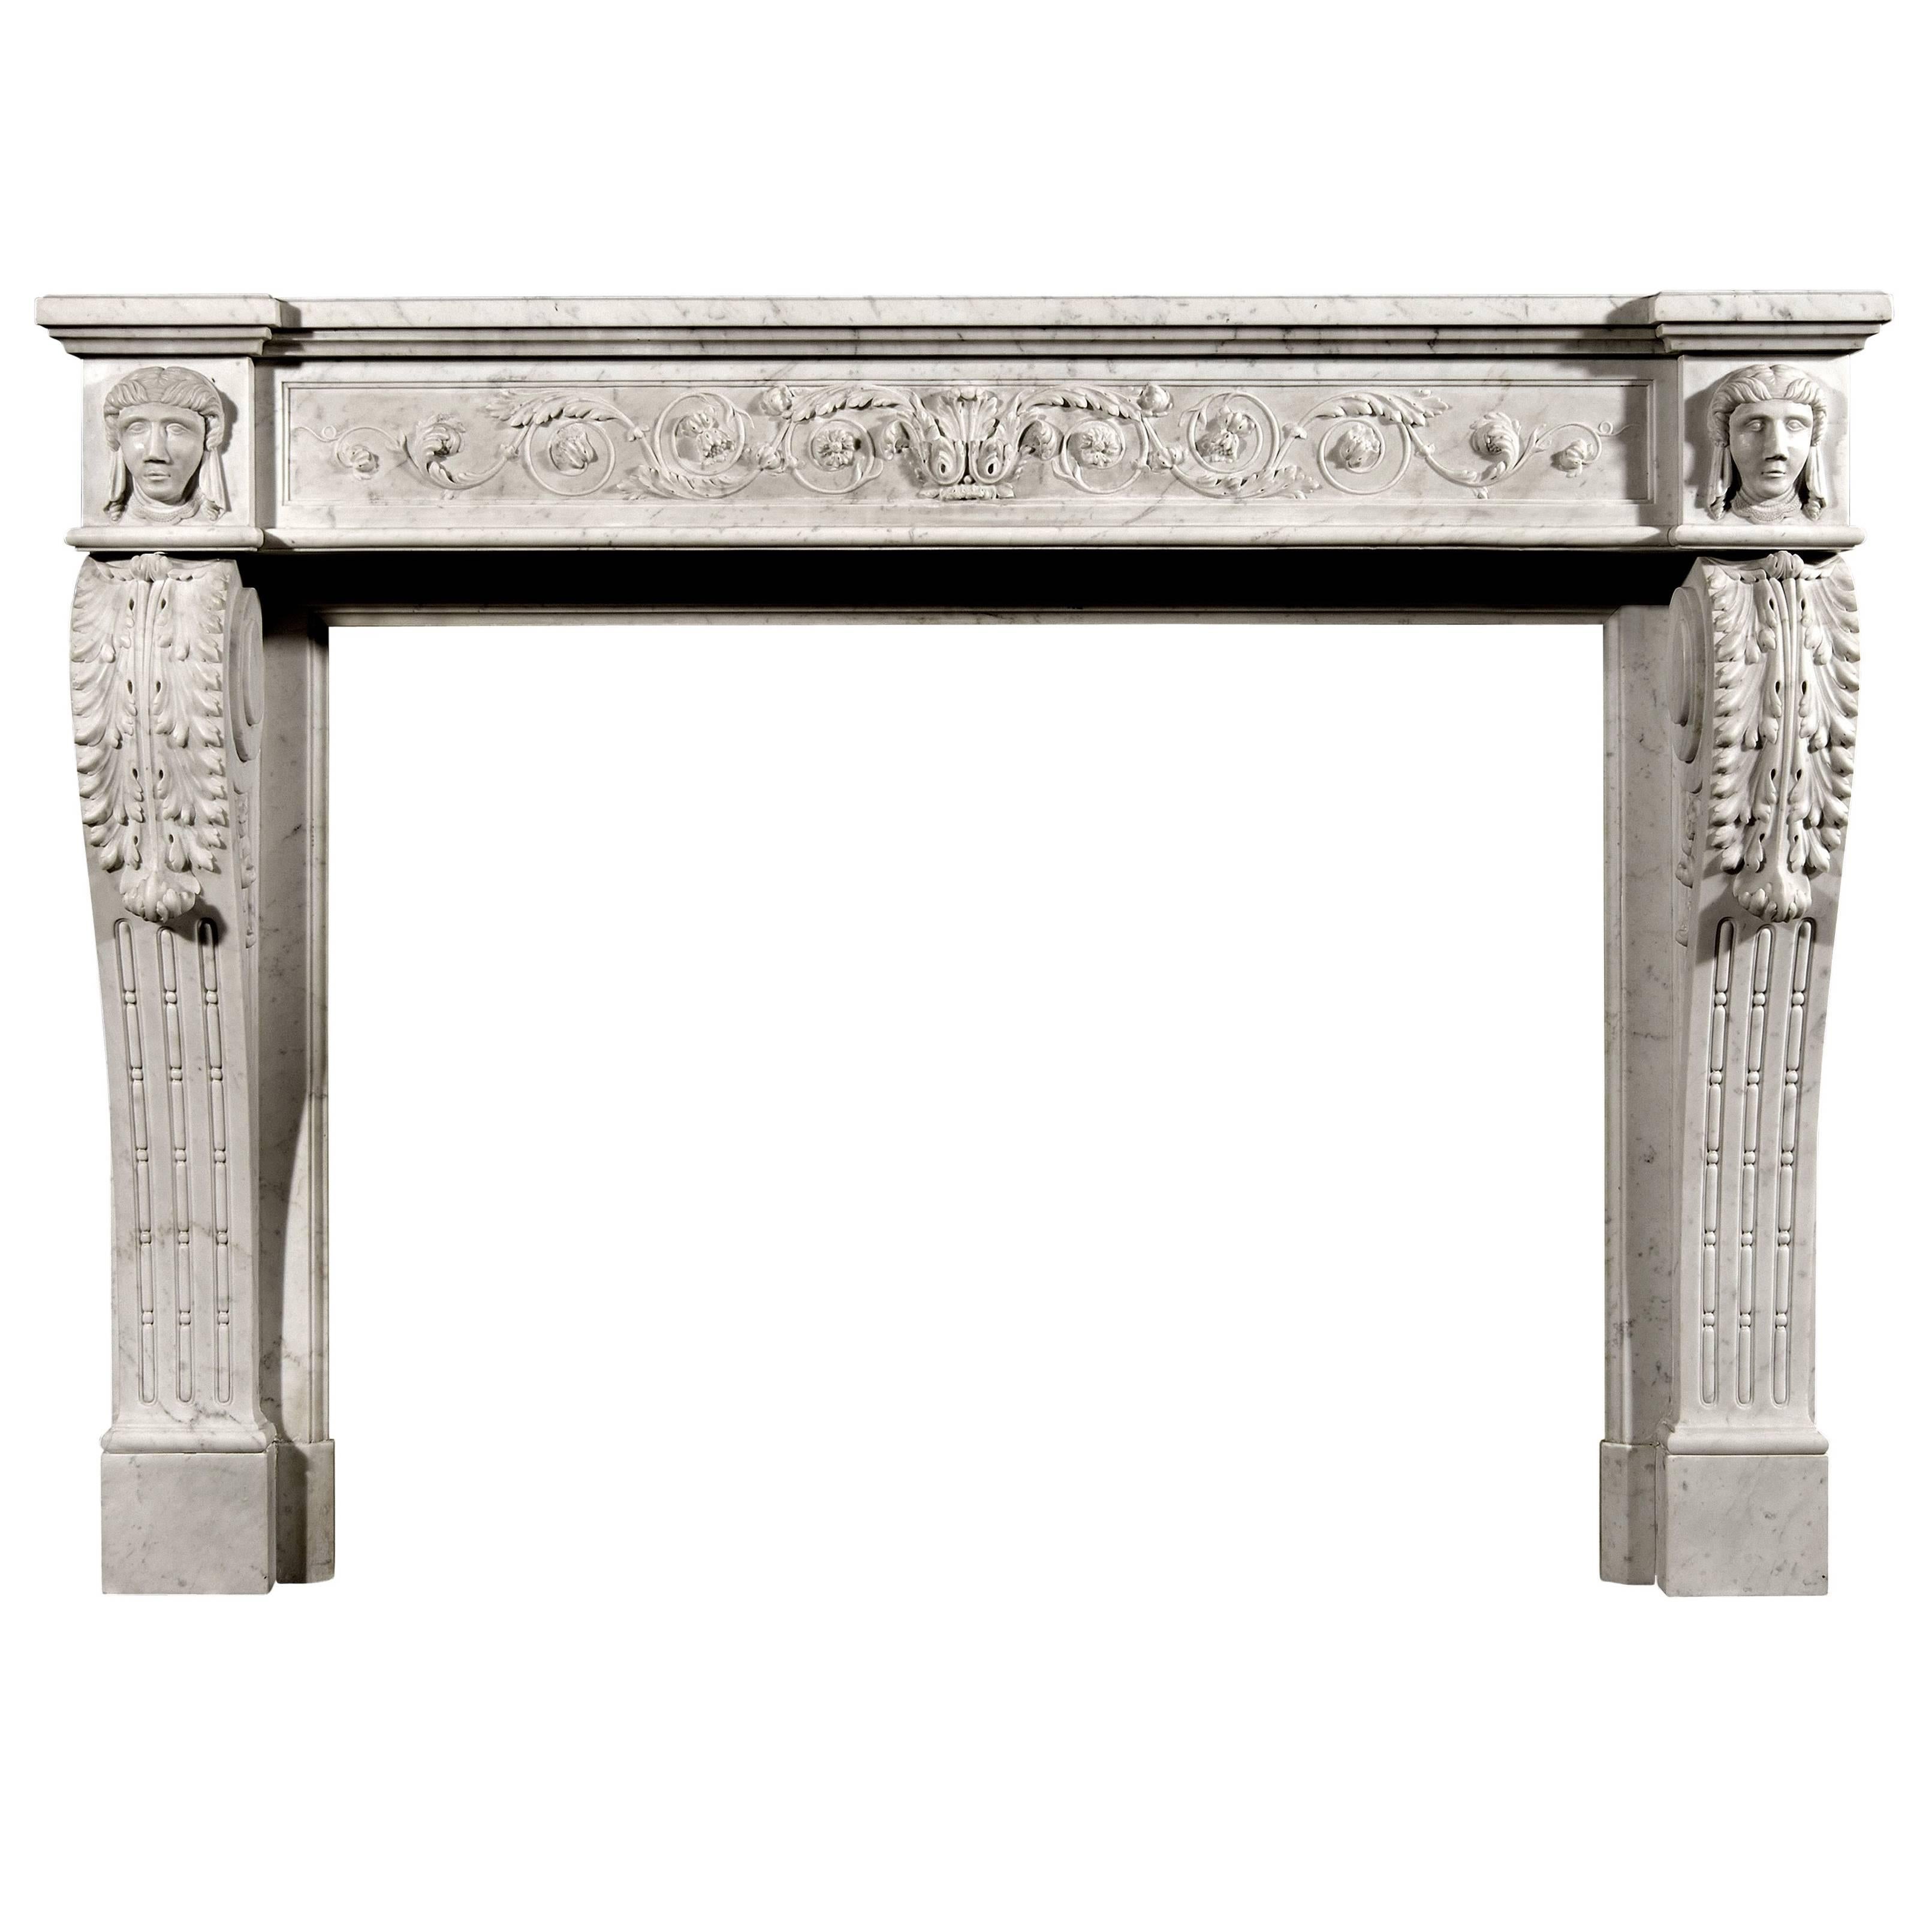 Unusual 19th Century, French XVI Style Carrara Marble Fireplace